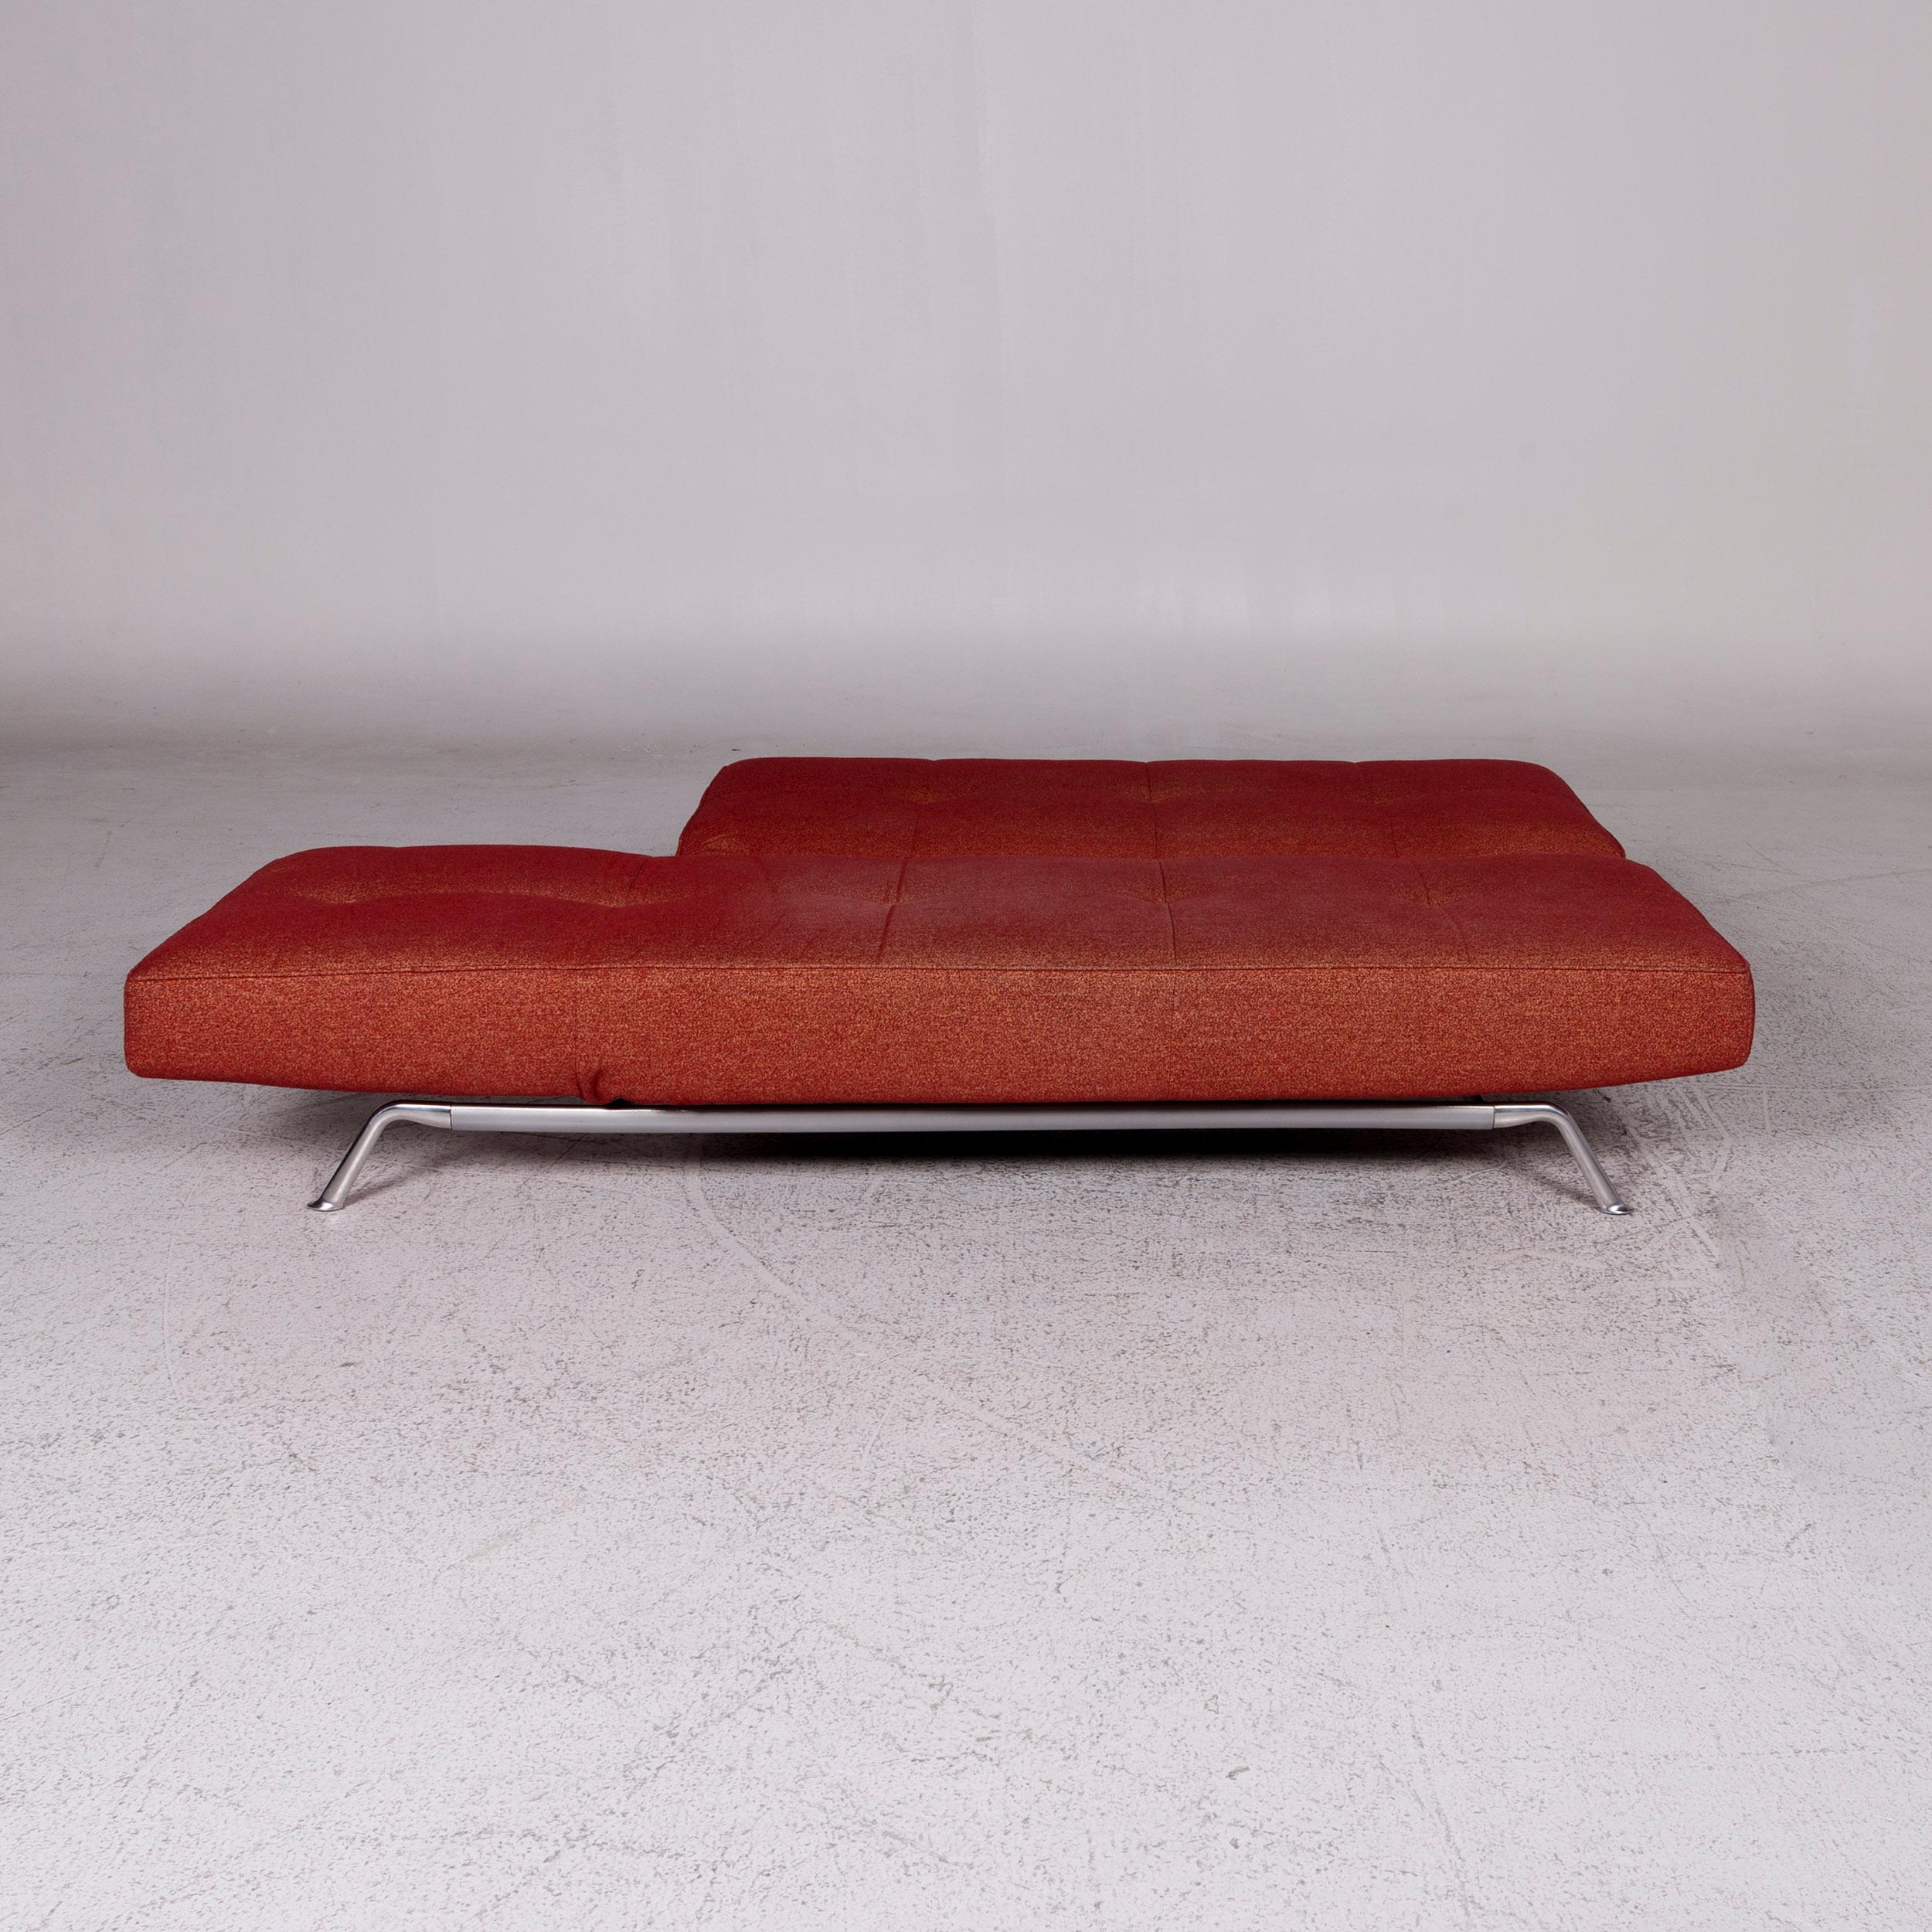 Modern Ligne Roset Smala Fabric Sofa Red Three-Seat Sofa Bed Function Couch